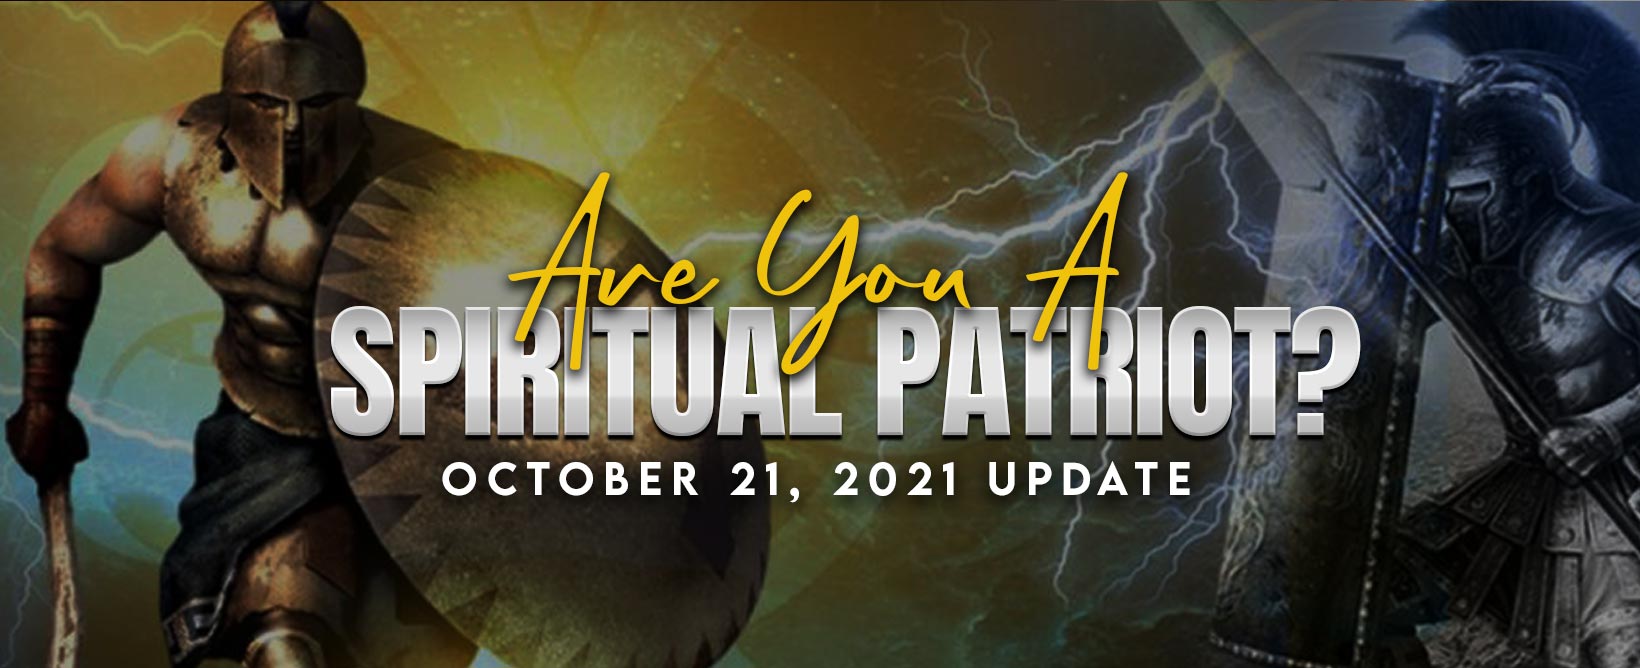 MyPatriotsNetwork-Are You A Spiritual Patriot? October 21, 2021 Update